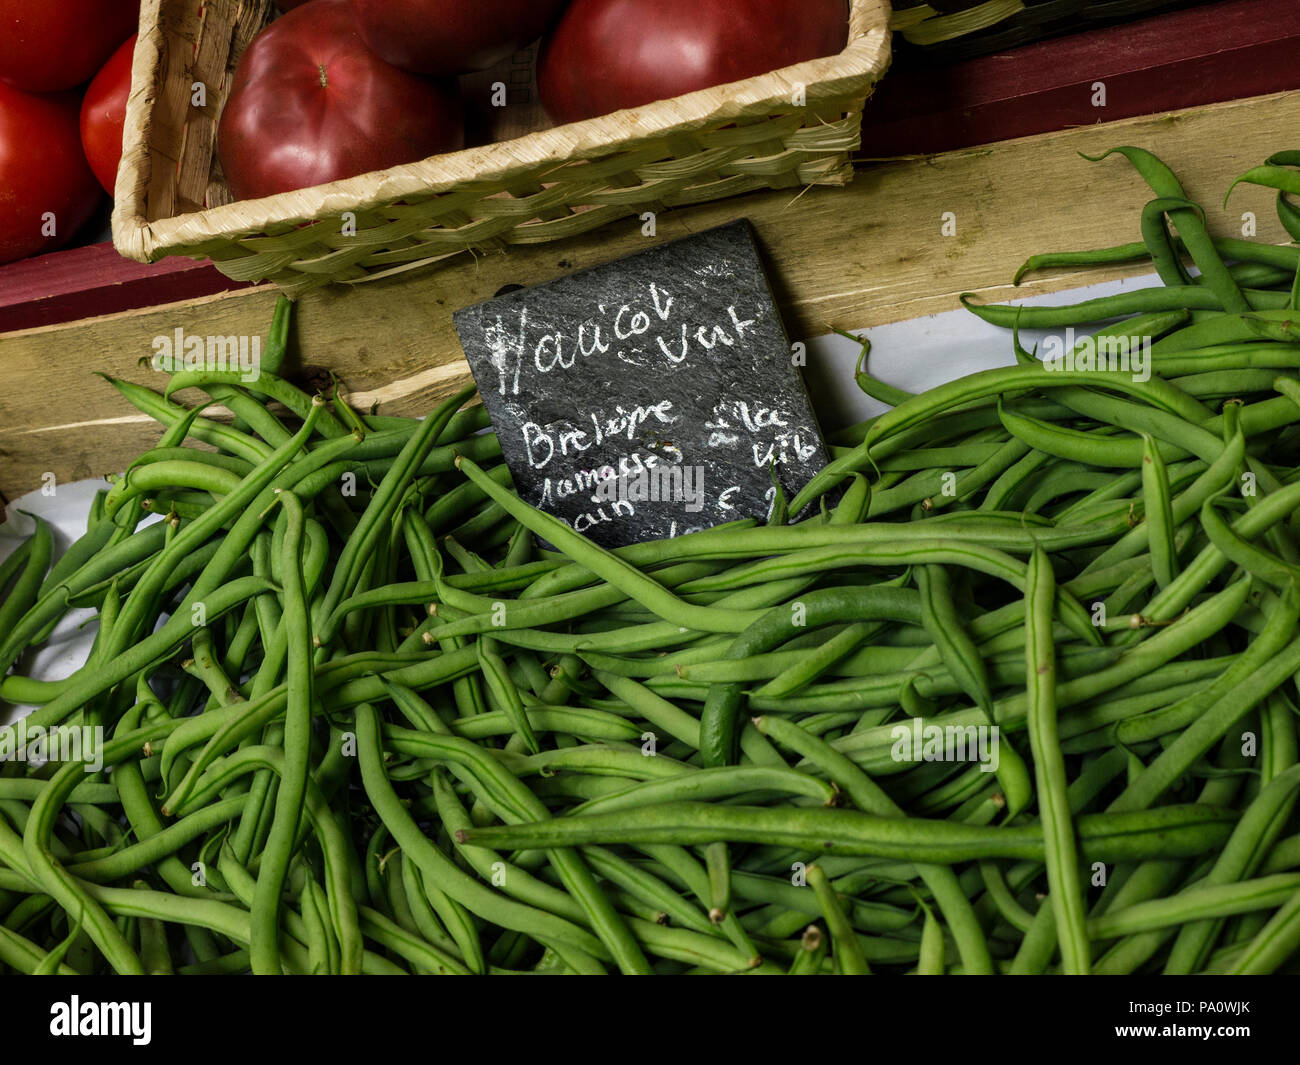 Haricots Verts loose organic French Green Beans vegetables rustic charming display with traditional slate chalk information label, hand picked in local Brittany vegetable farm Bretagne France Stock Photo